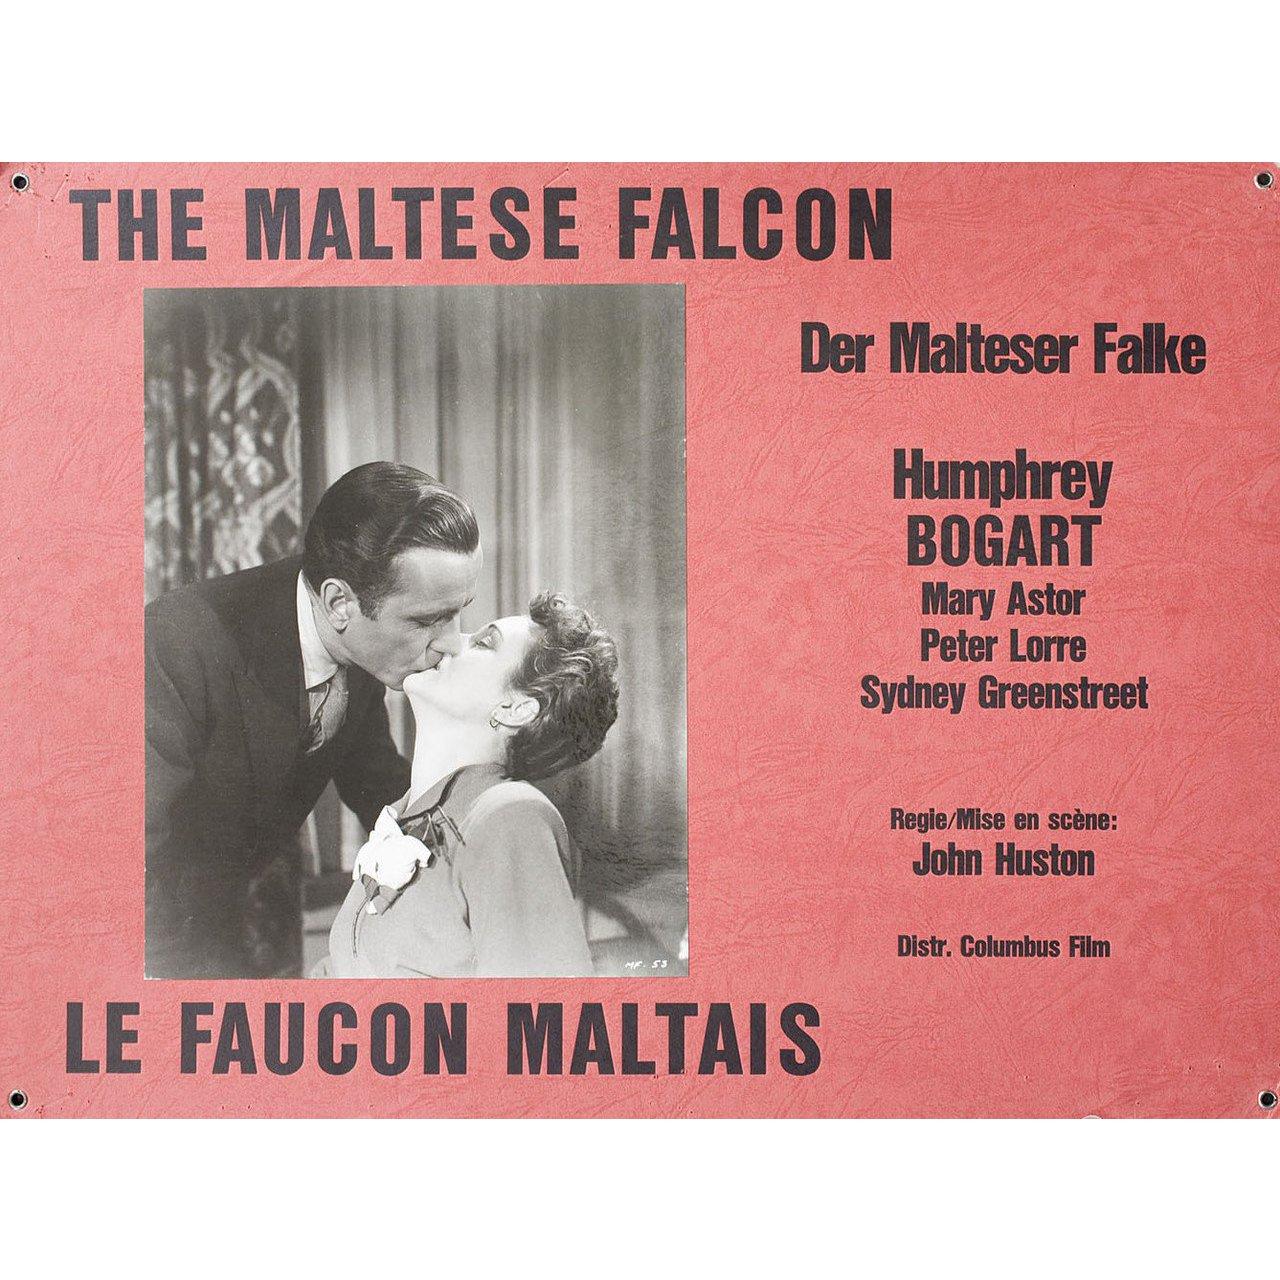 Original 1970s Swiss scene card for the first Swiss theatrical release of the 1941 film The Maltese Falcon directed by John Huston with Humphrey Bogart / Mary Astor / Gladys George / Peter Lorre. Very good-fine condition. Please note: the size is